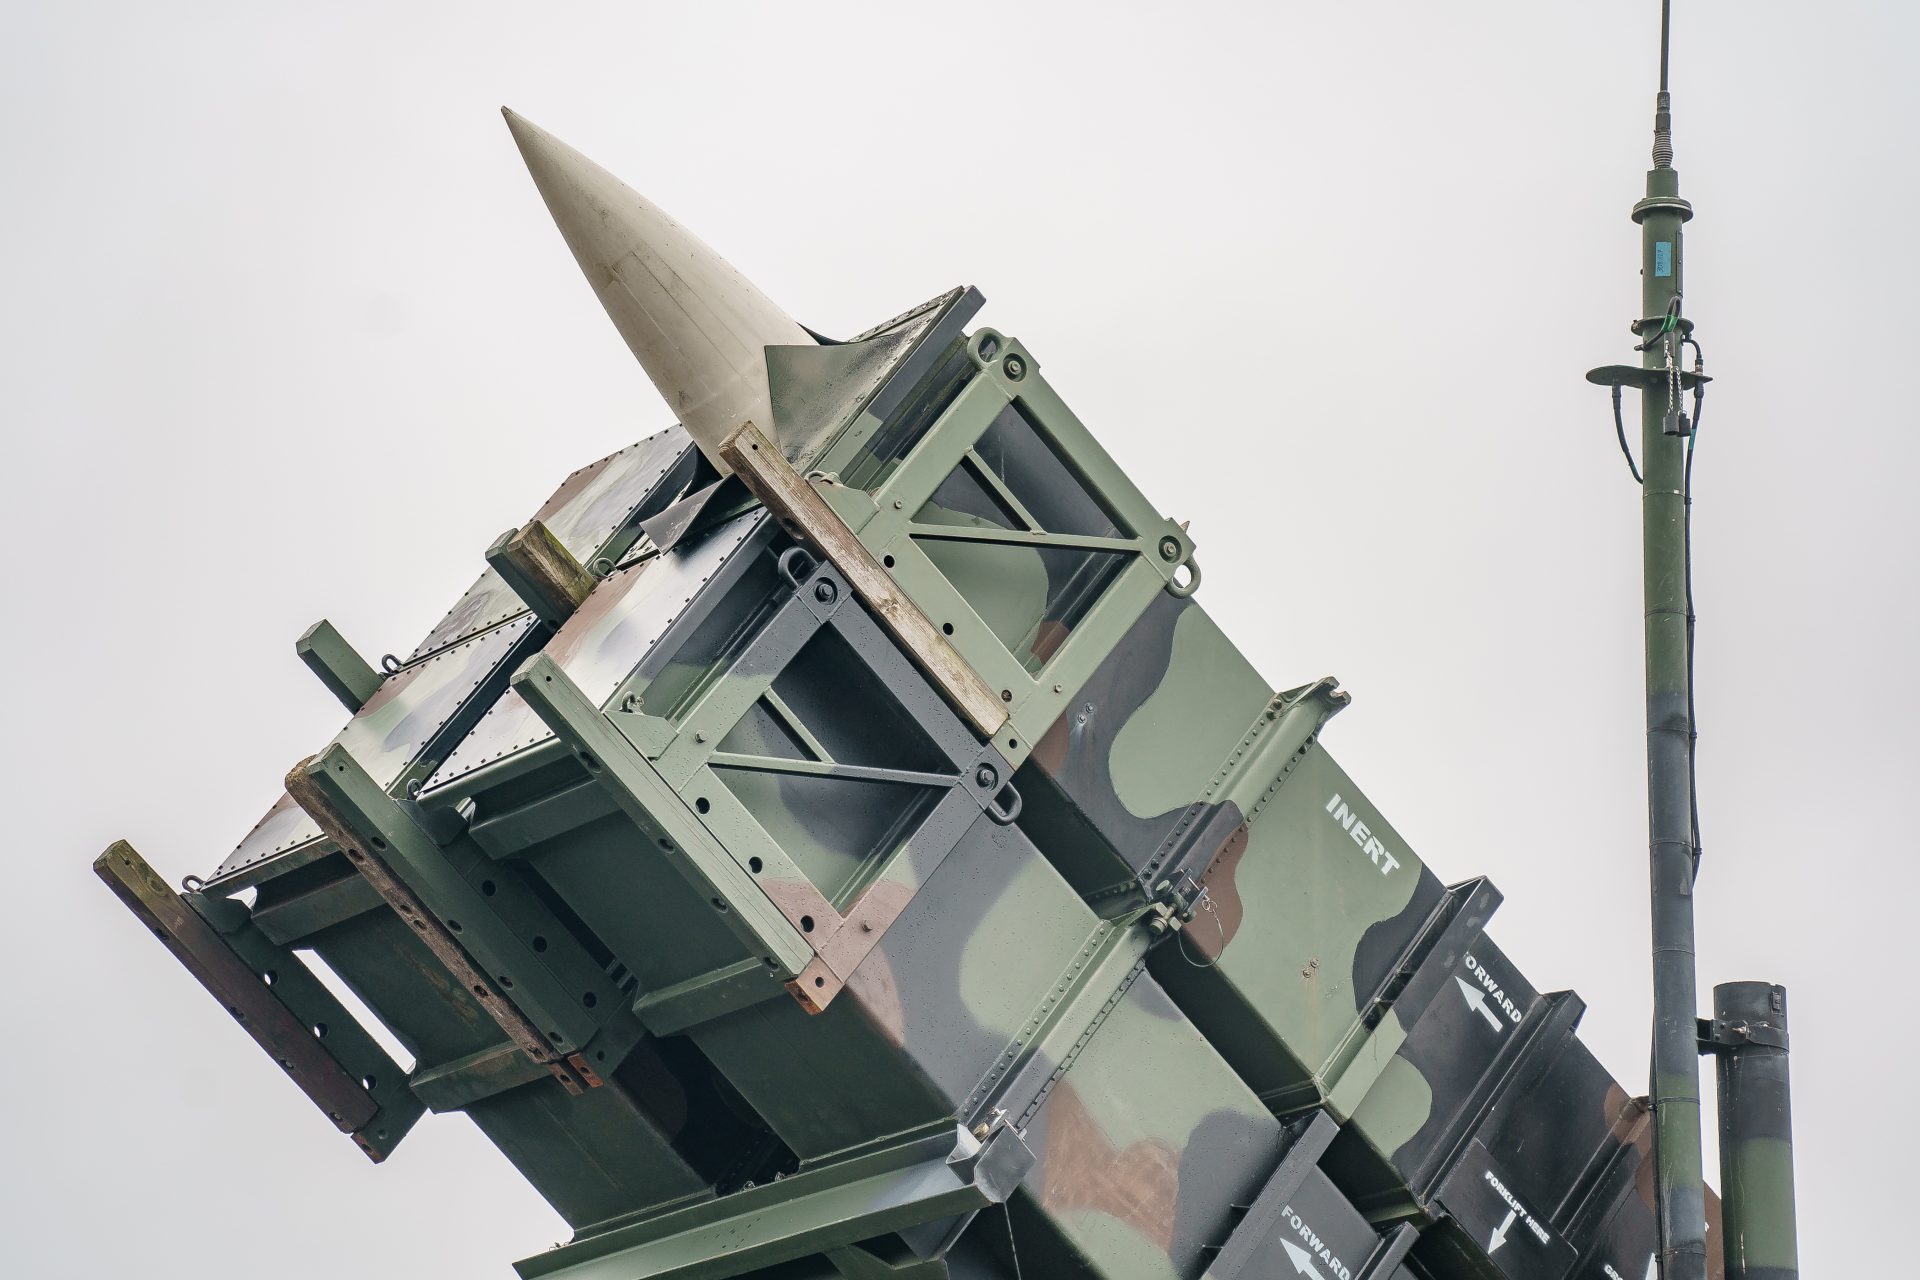 America is sending another powerful air defense system to Ukraine